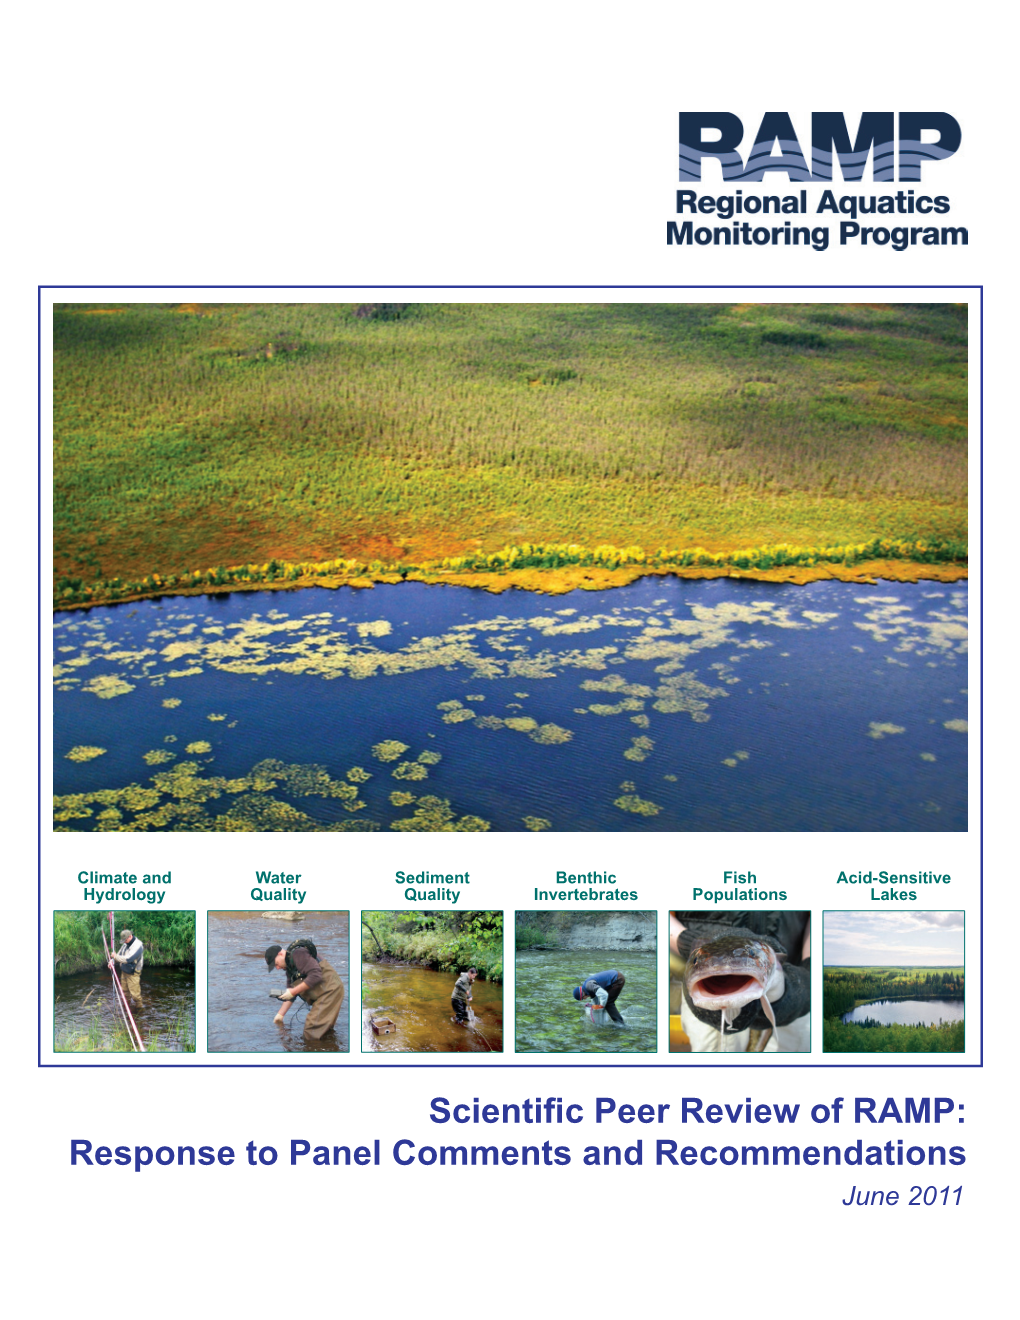 Scientific Peer Review of Ramp: Response to Panel Comments and Recommendations